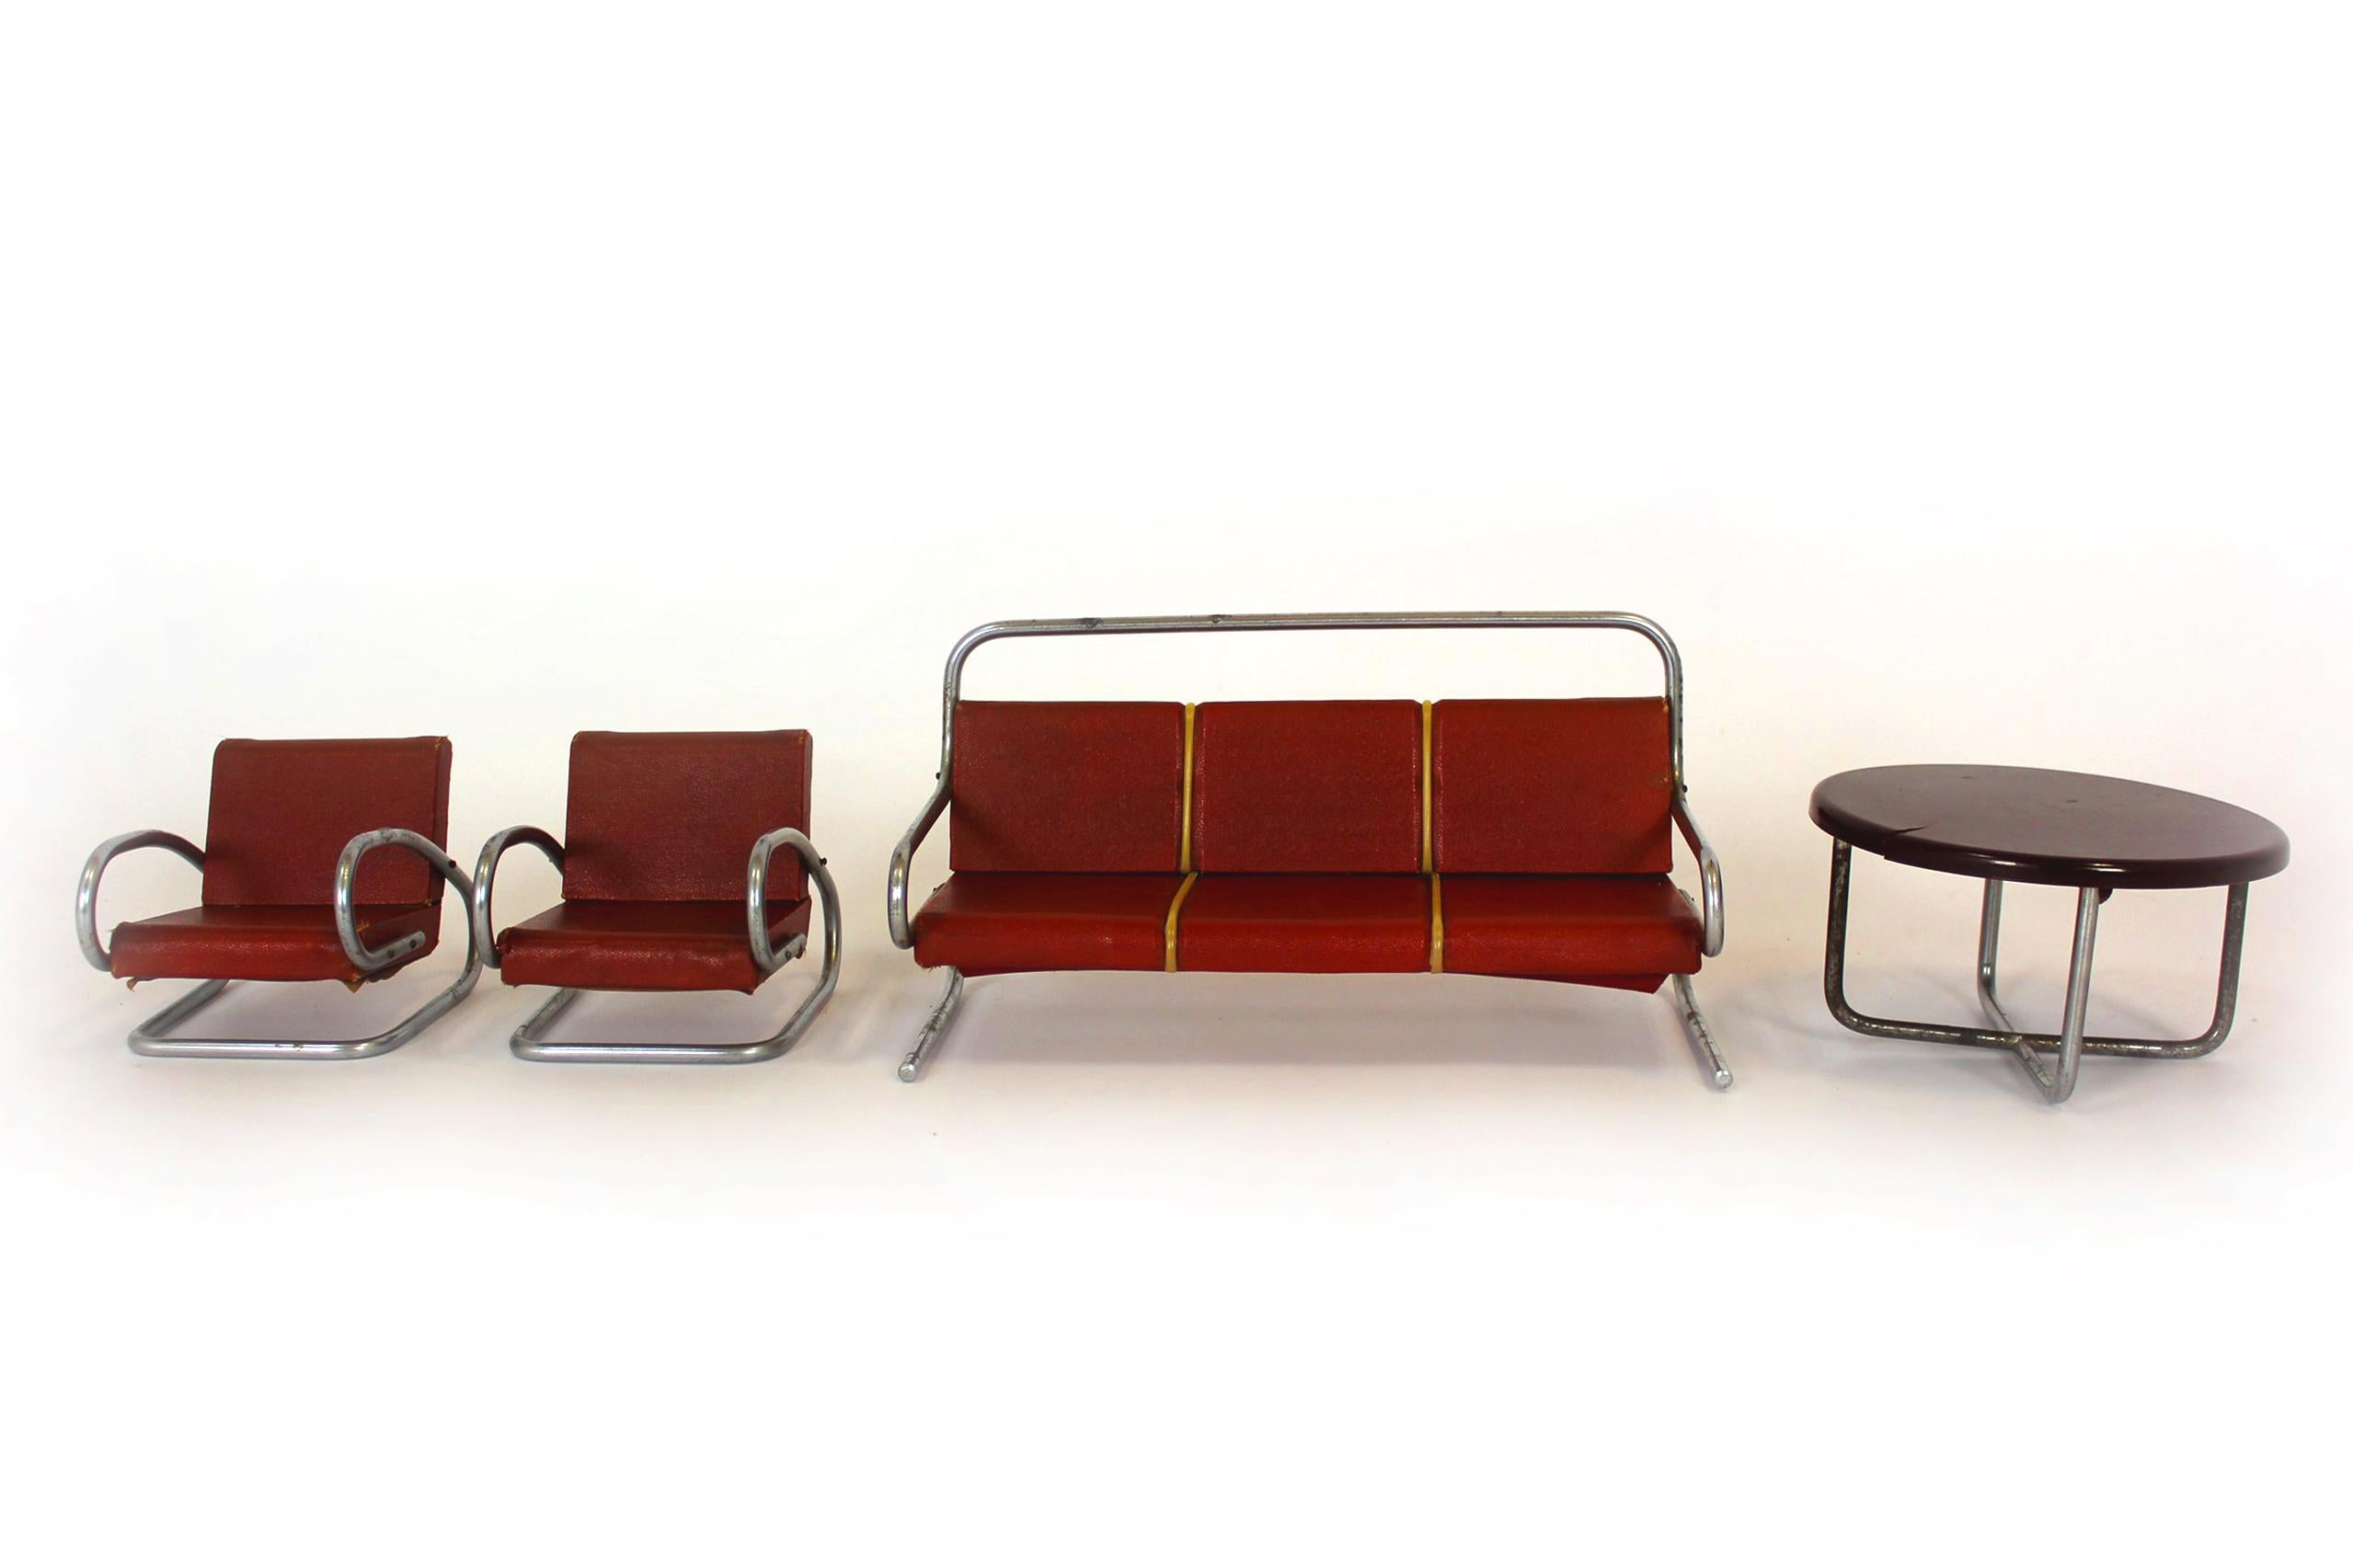 A set of miniature furniture in the Bauhaus style, designed by Jindrich Halabala. Produced in the 1930s in Czechoslovakia, miniatures of this type were used as show models. The set consists of a sofa, two armchairs and a table.